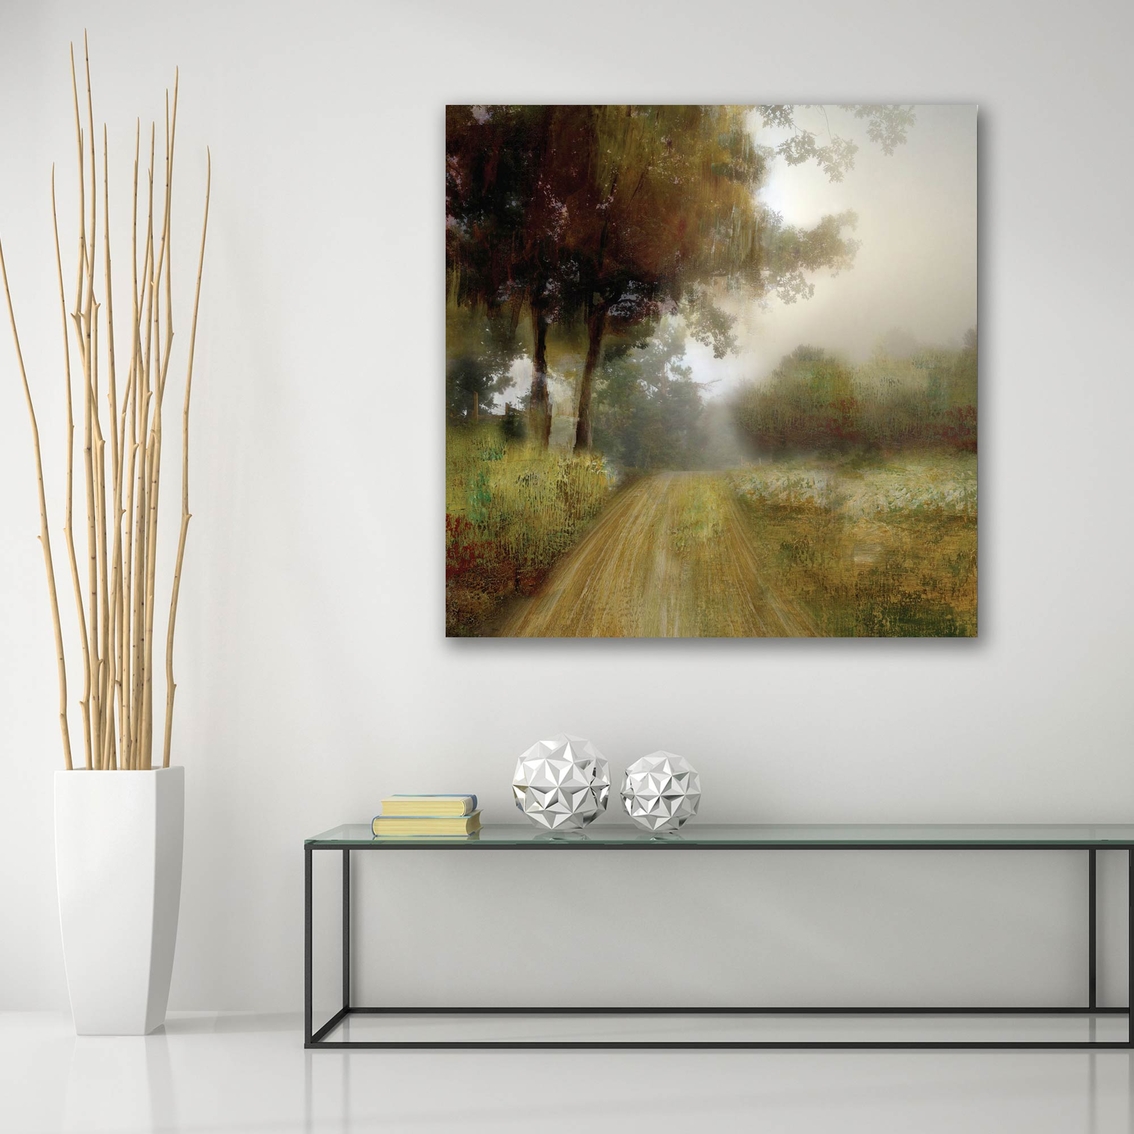 Courtside Market Country Road Canvas Wall Art - Image 6 of 7